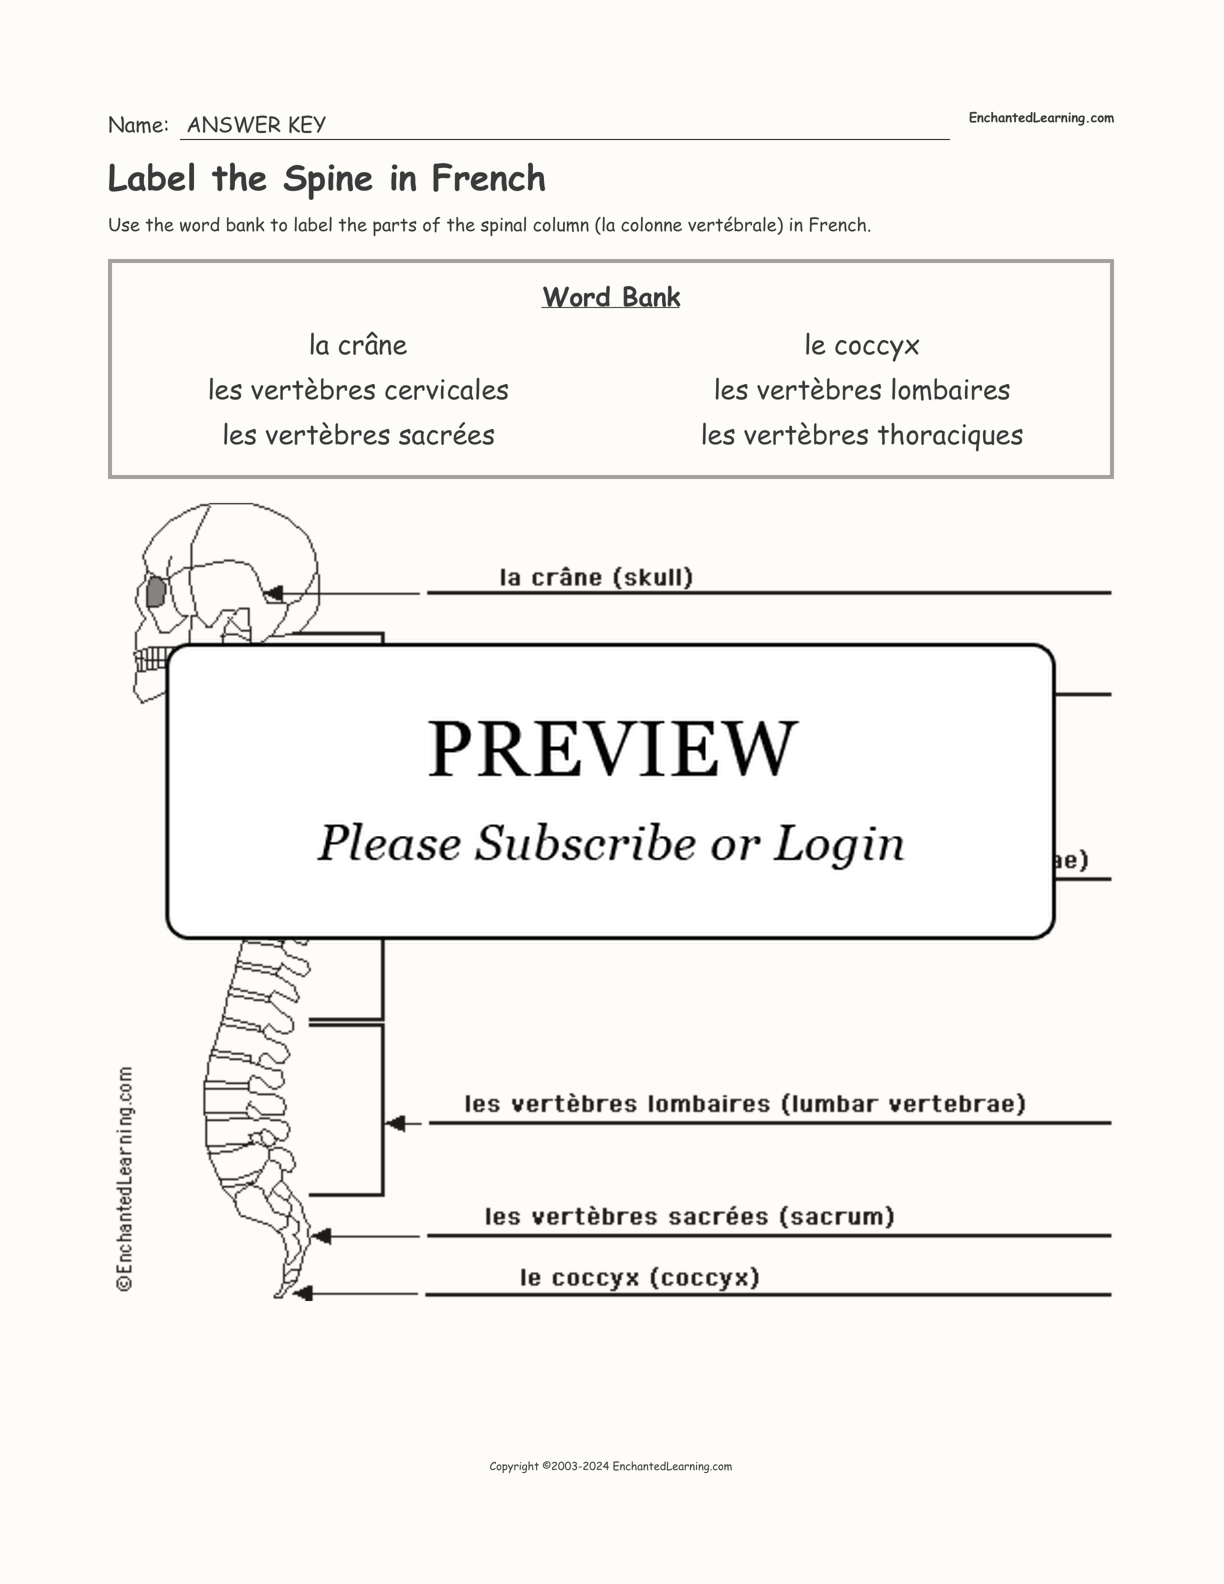 Label the Spine in French interactive worksheet page 2